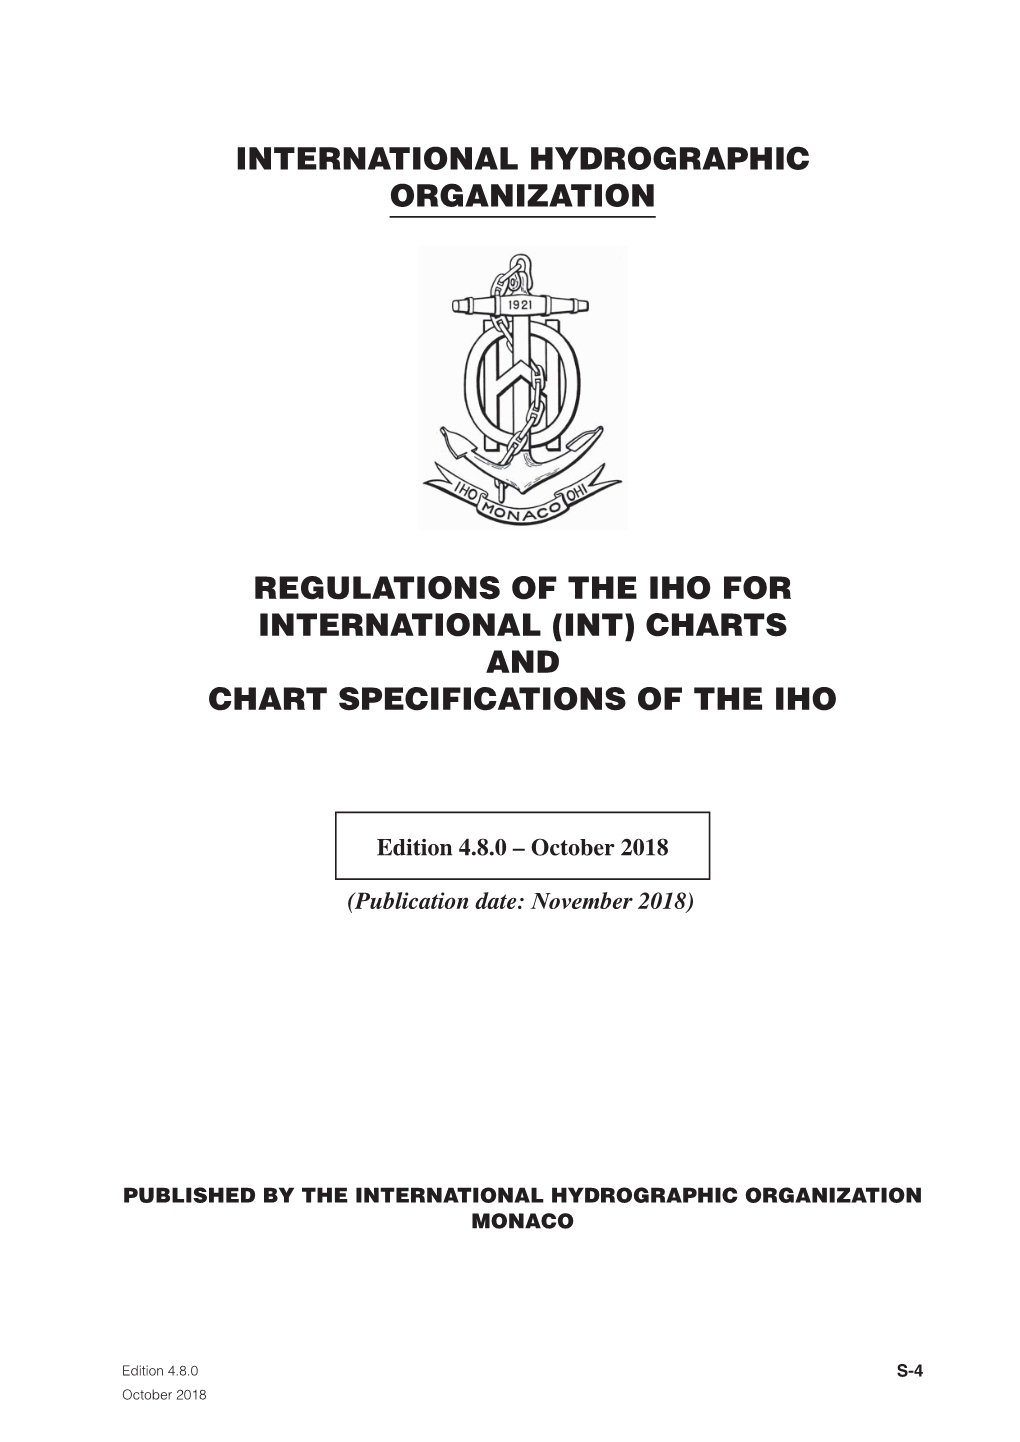 Charts and Chart Specifications of the Iho